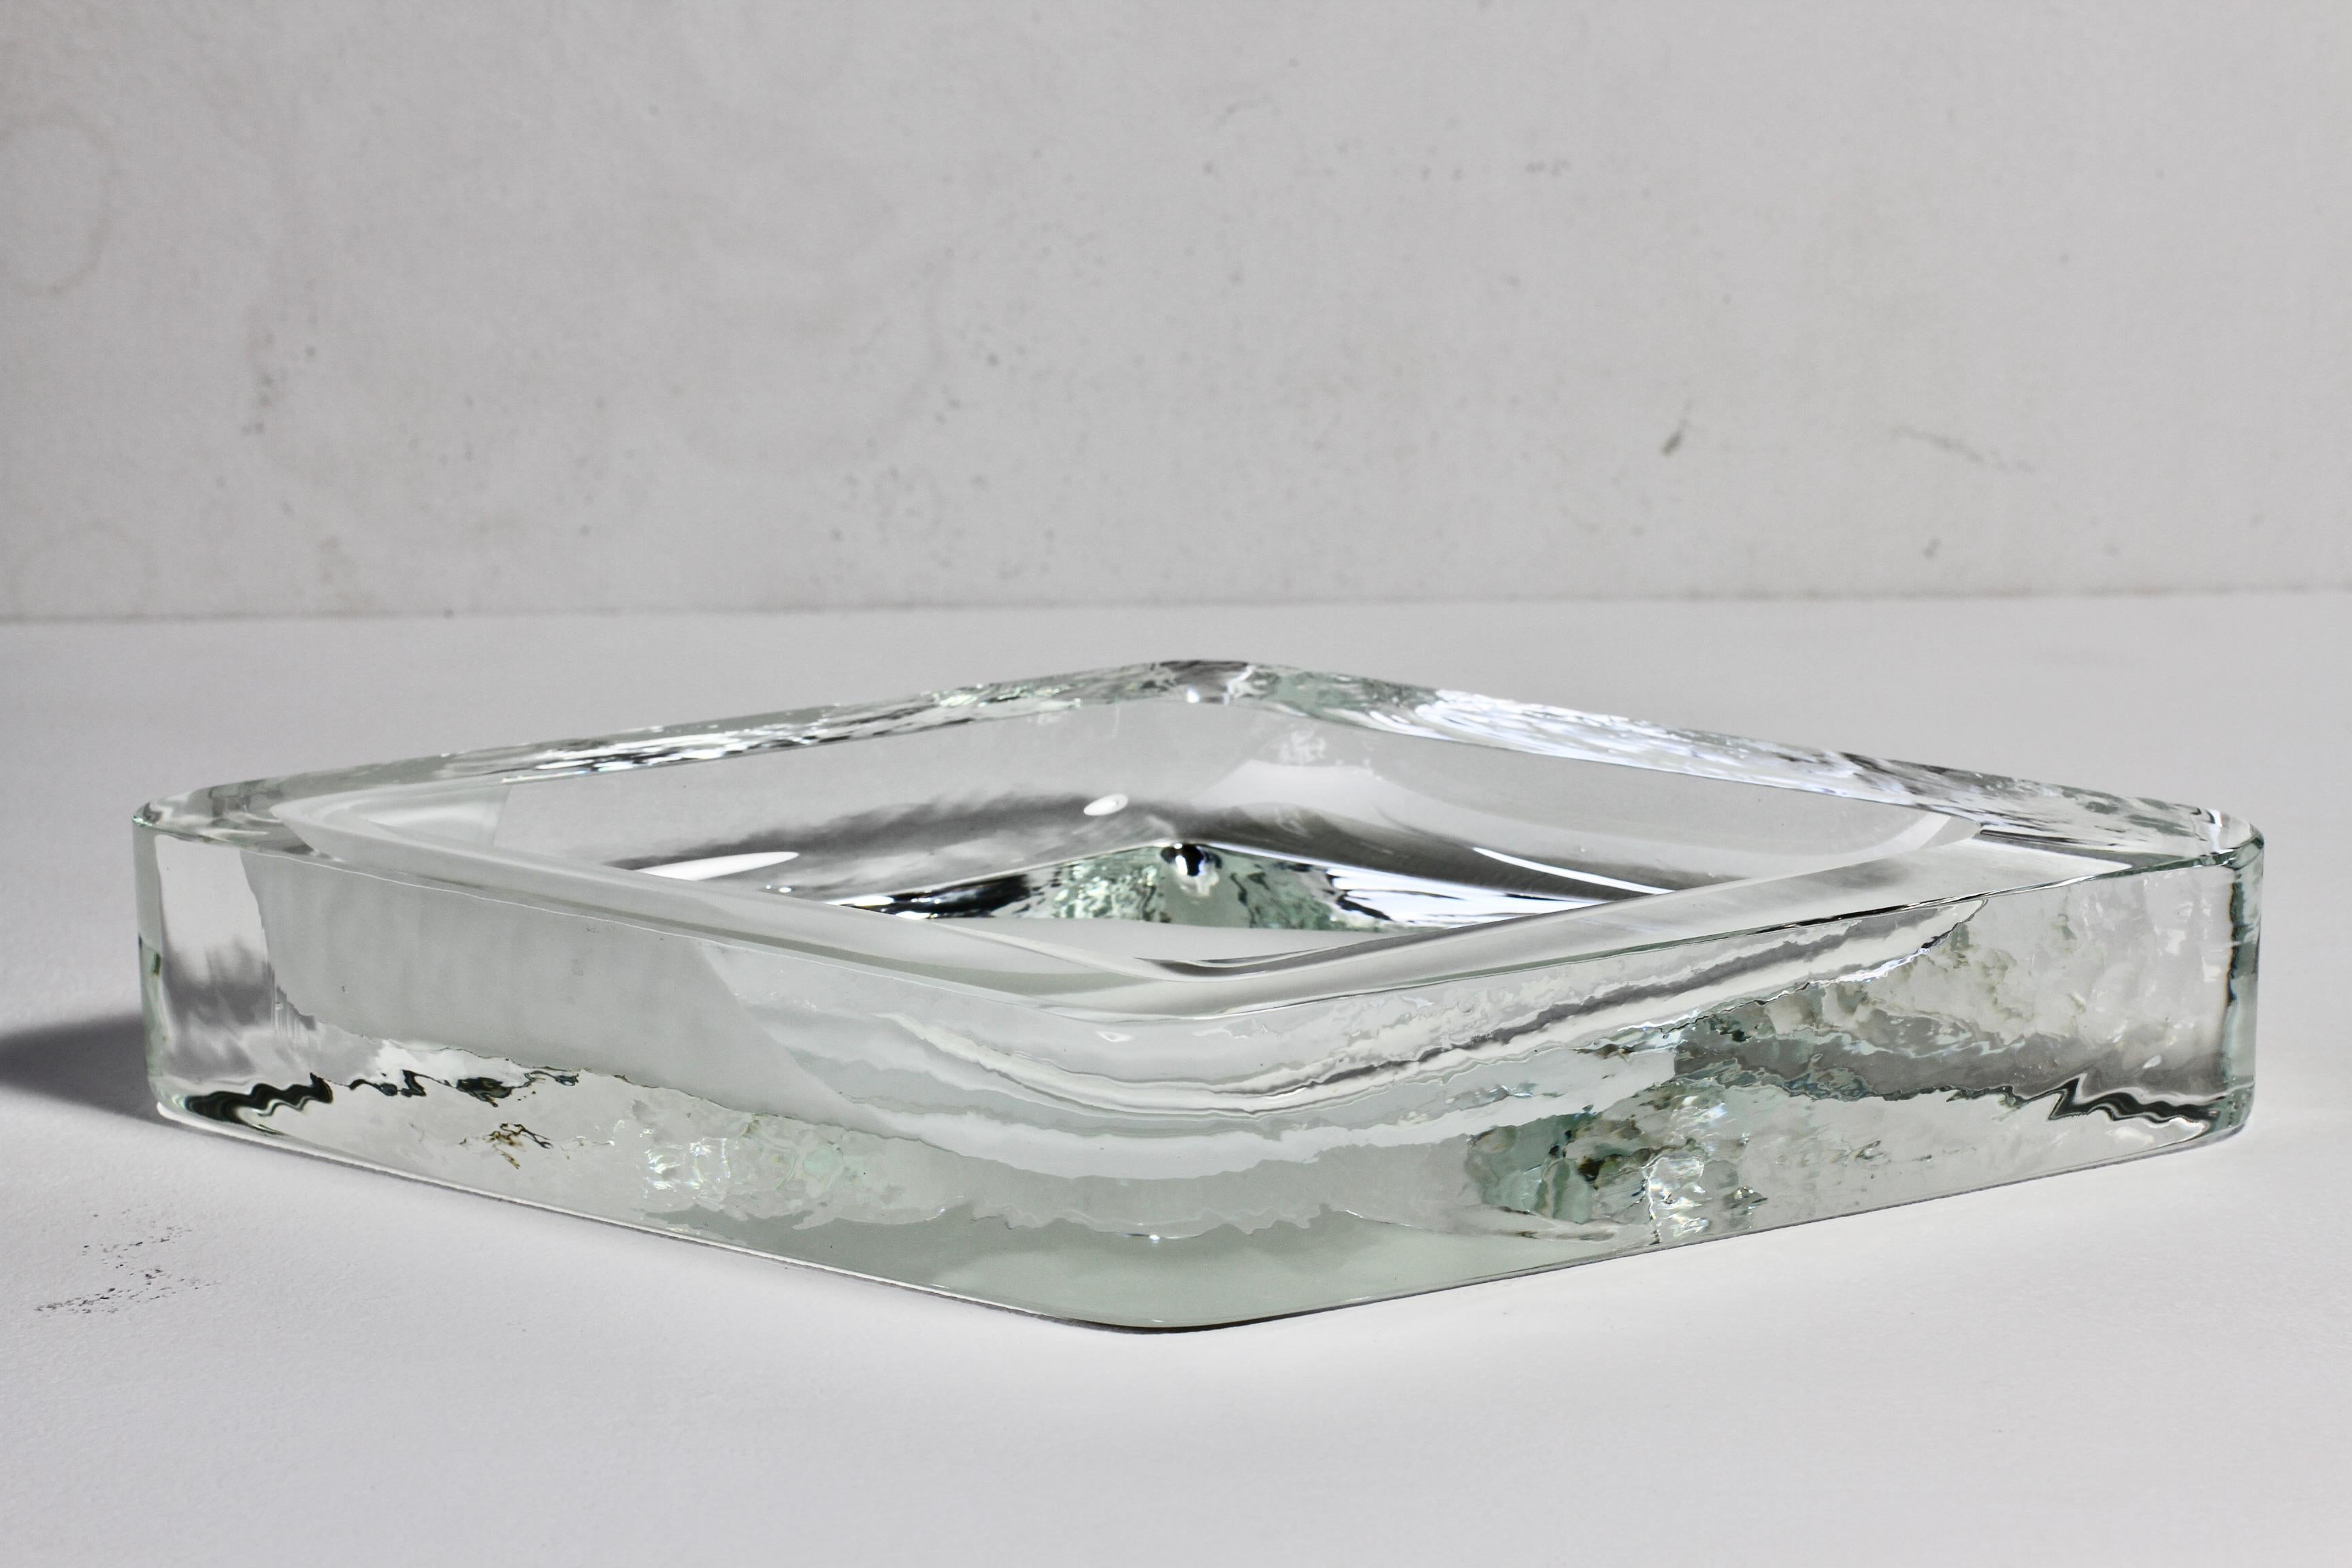 Huge Cenedese Italian Rhombus White and Clear Murano Glass Bowl, Dish, Ashtray For Sale 13